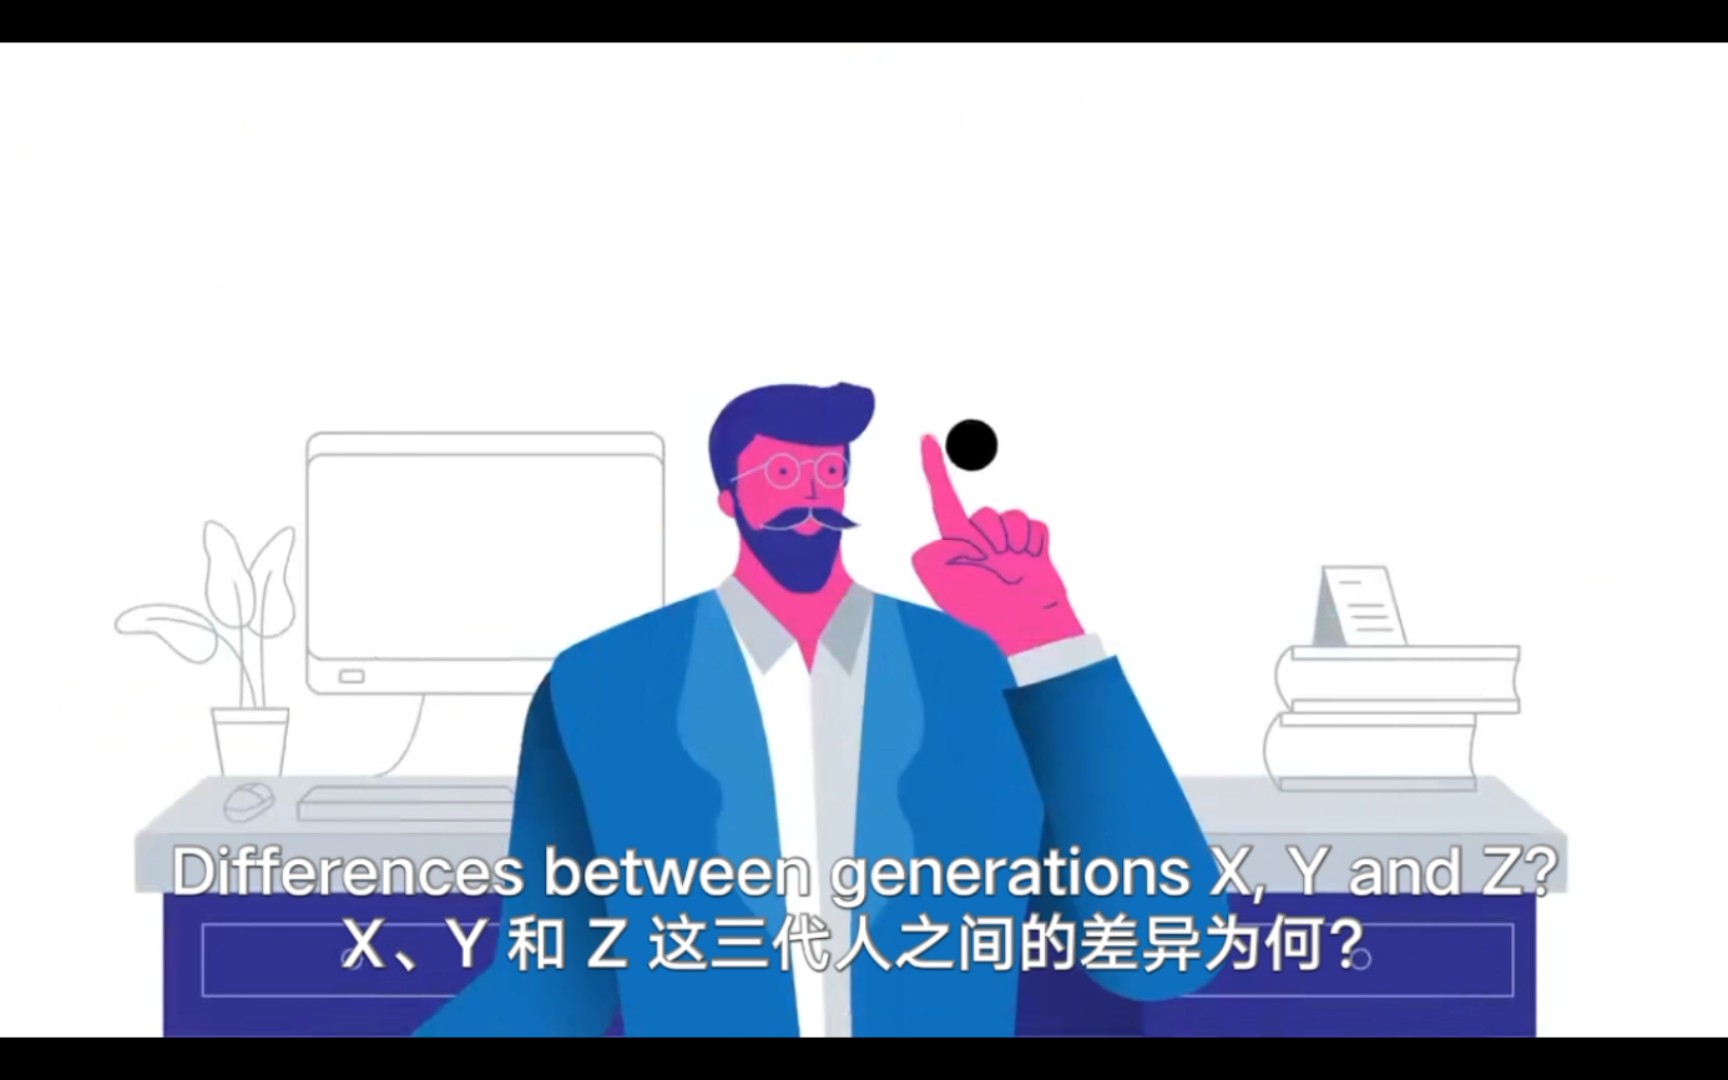 X、Y、Z世代：你是哪一代? Generations X, Y, and Z: Which One Are You?